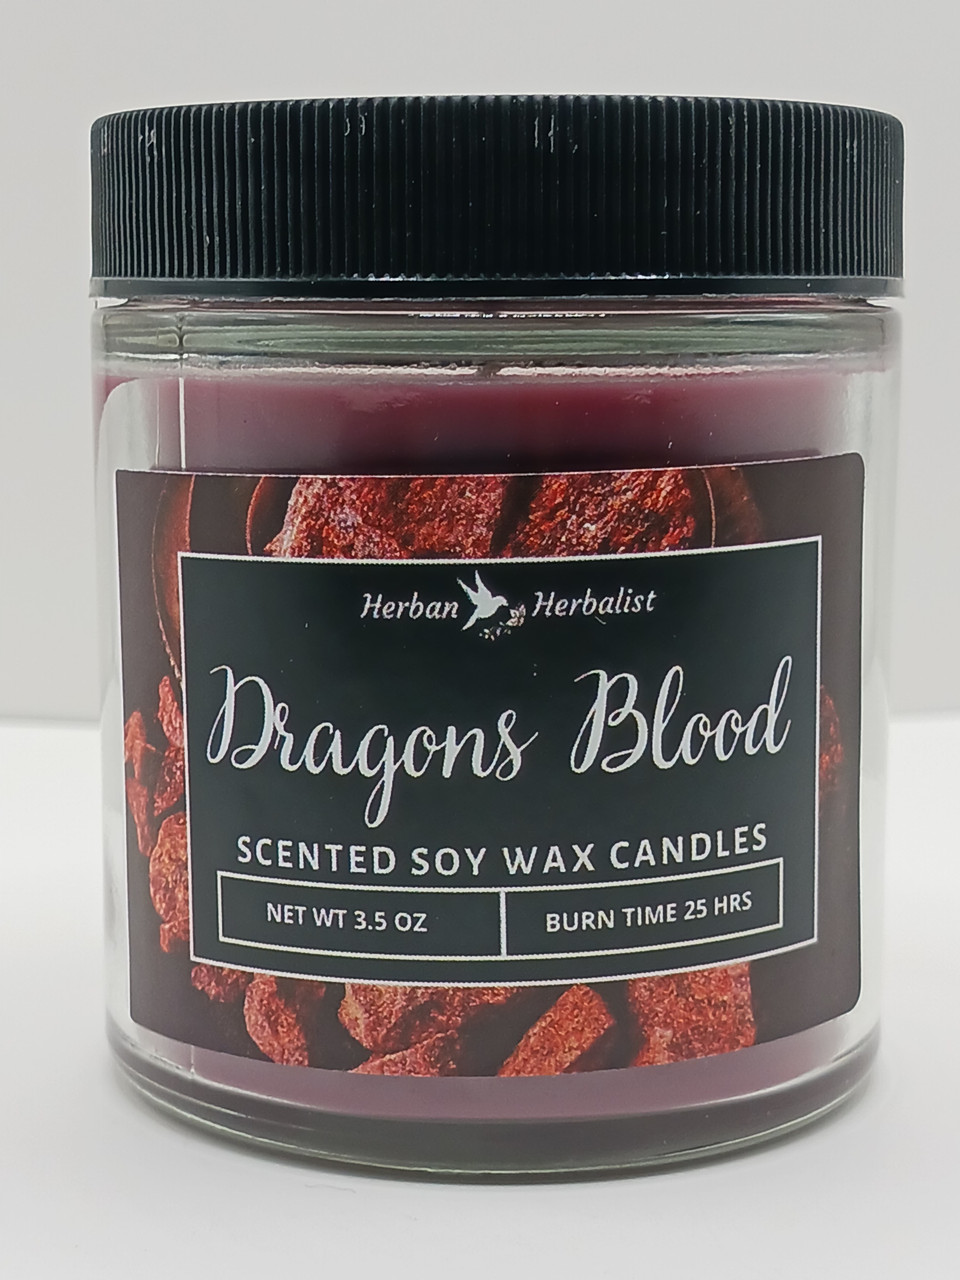  Dragons Blood Spell Kit Includes Candle, Soap & Oil